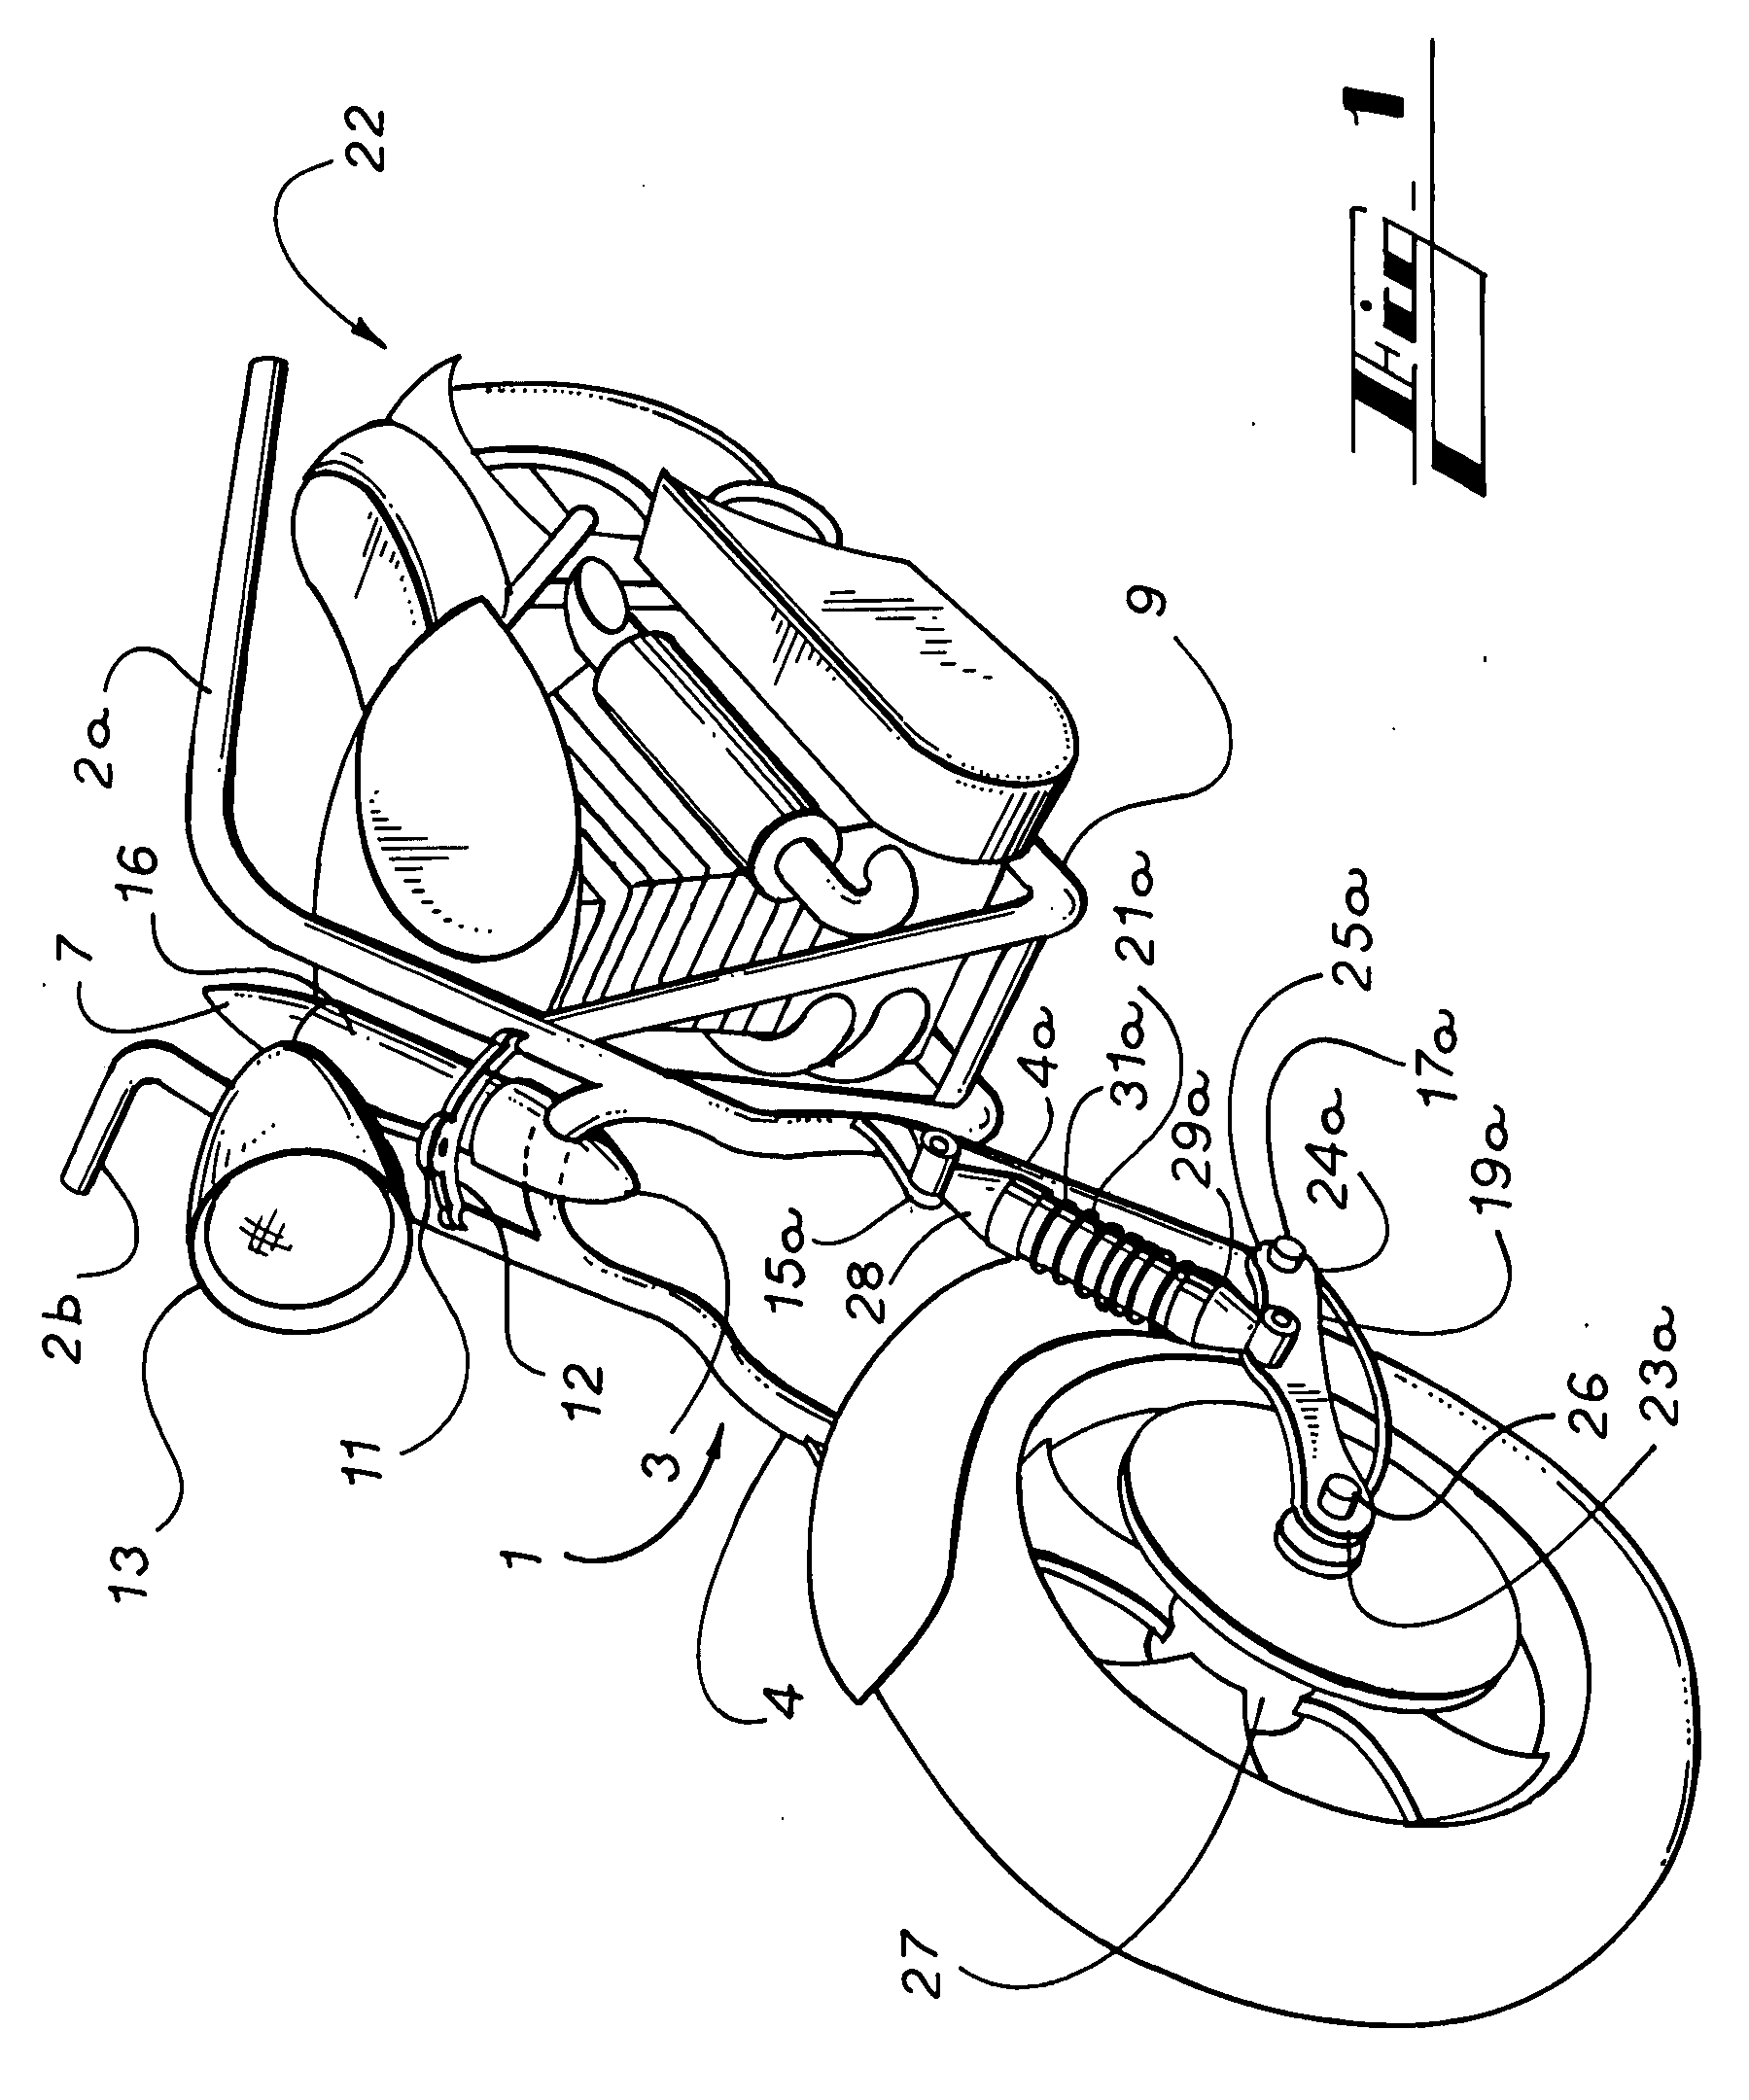 Unitary vehicular front end and method of use thereof